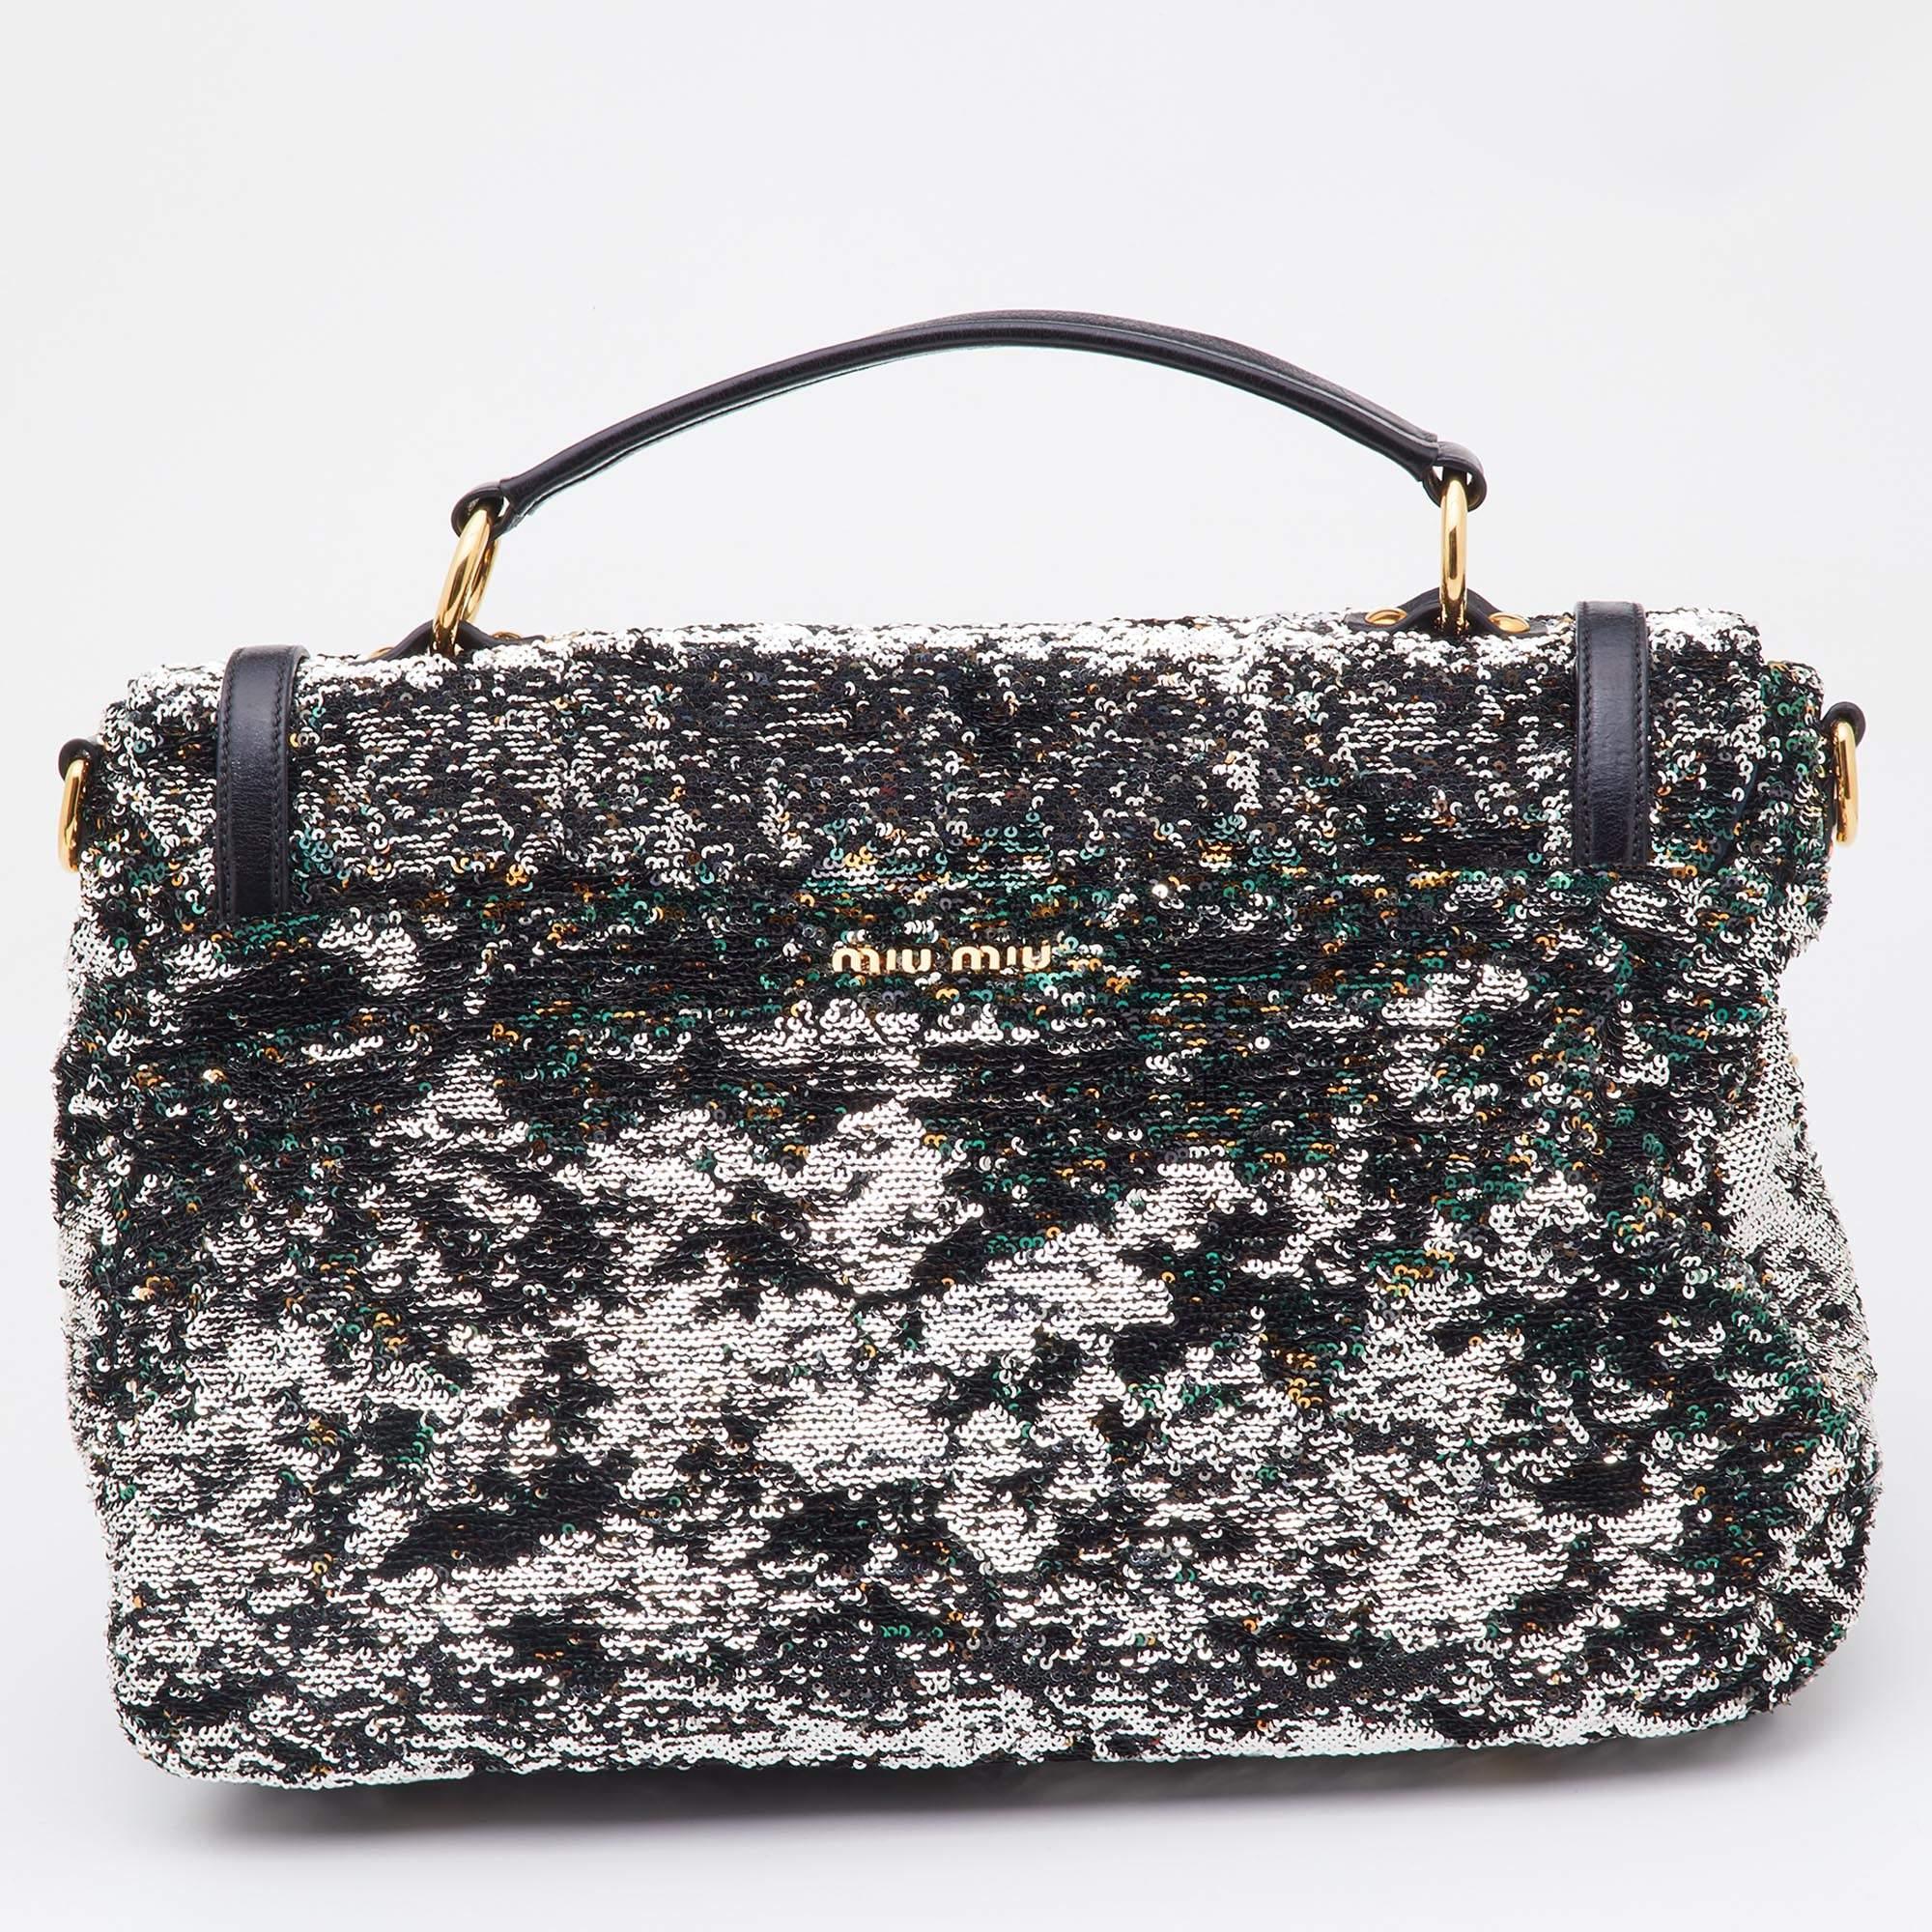 A lovely silhouette and gorgeous details make this bag from Miu Miu a covetable piece that you must splurge on! It is decorated with sequins all over the exterior and has a logo-detailed lock on the front flap. The bag opens to a spacious,